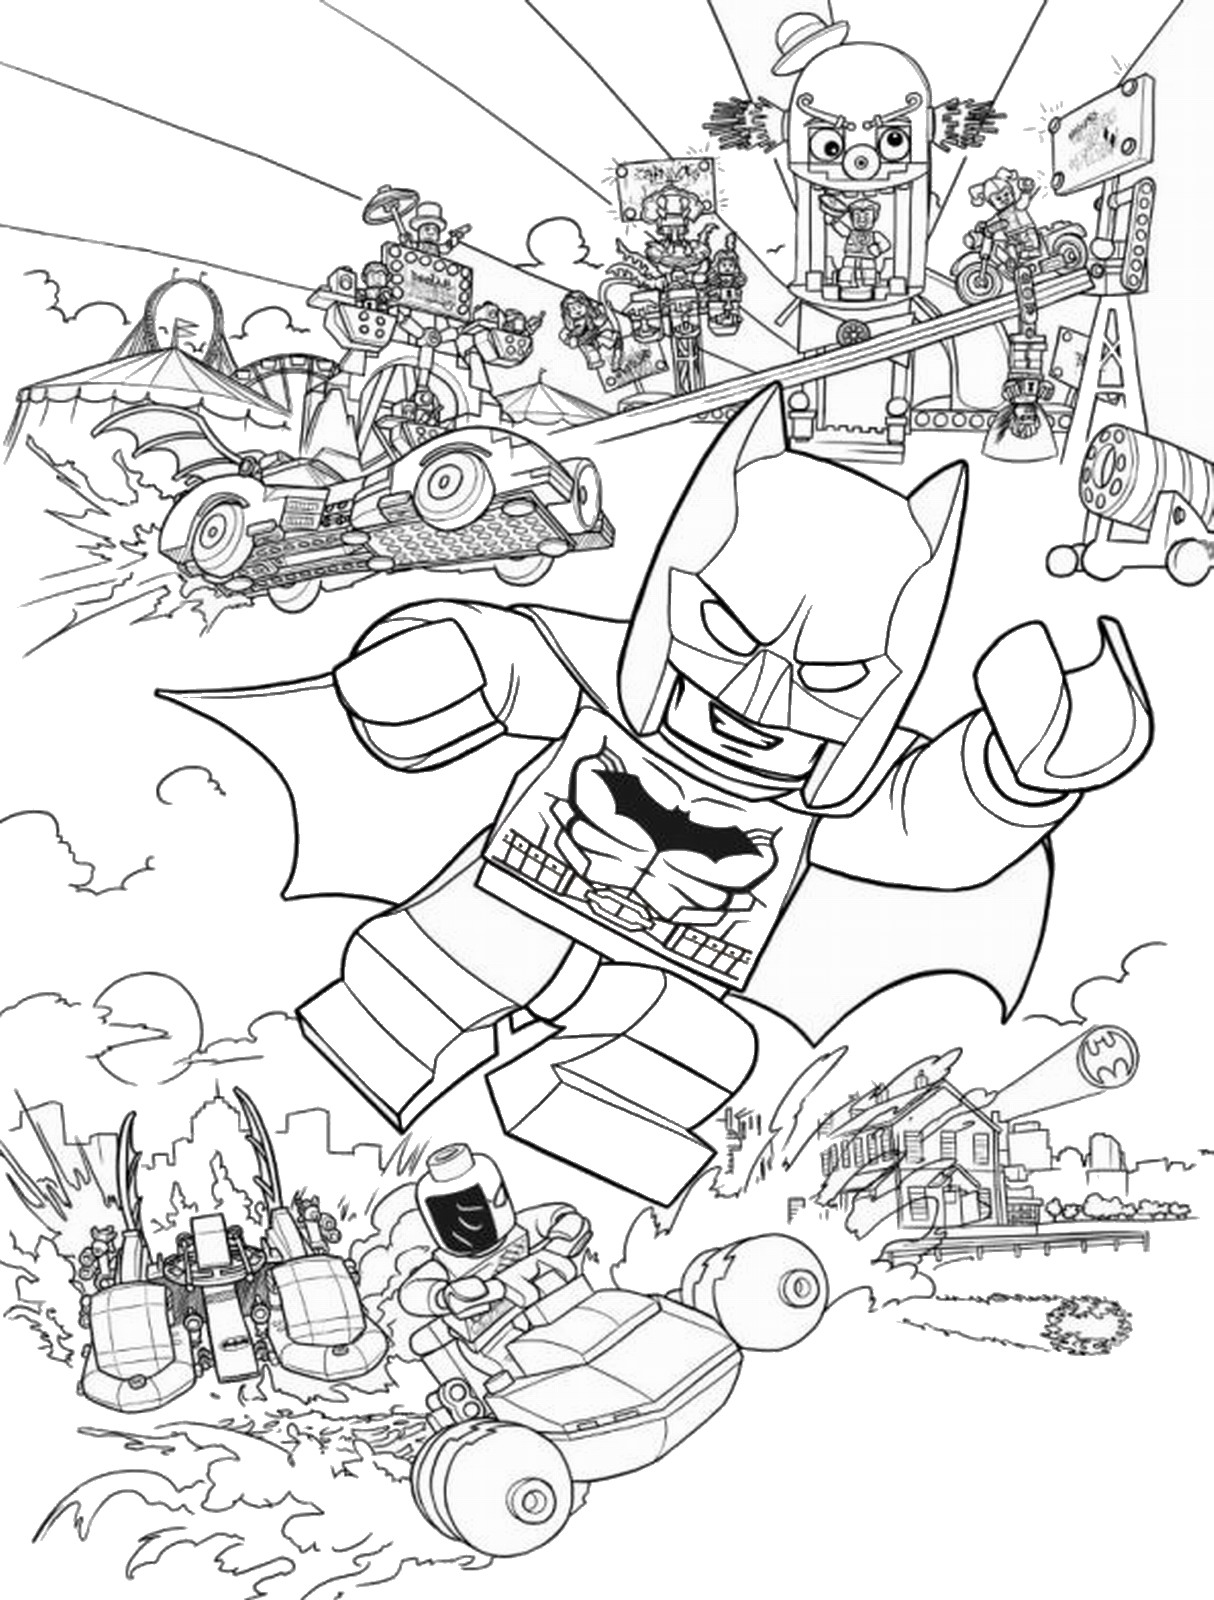 Lego Batman Coloring Pages To Print Coloring Pages